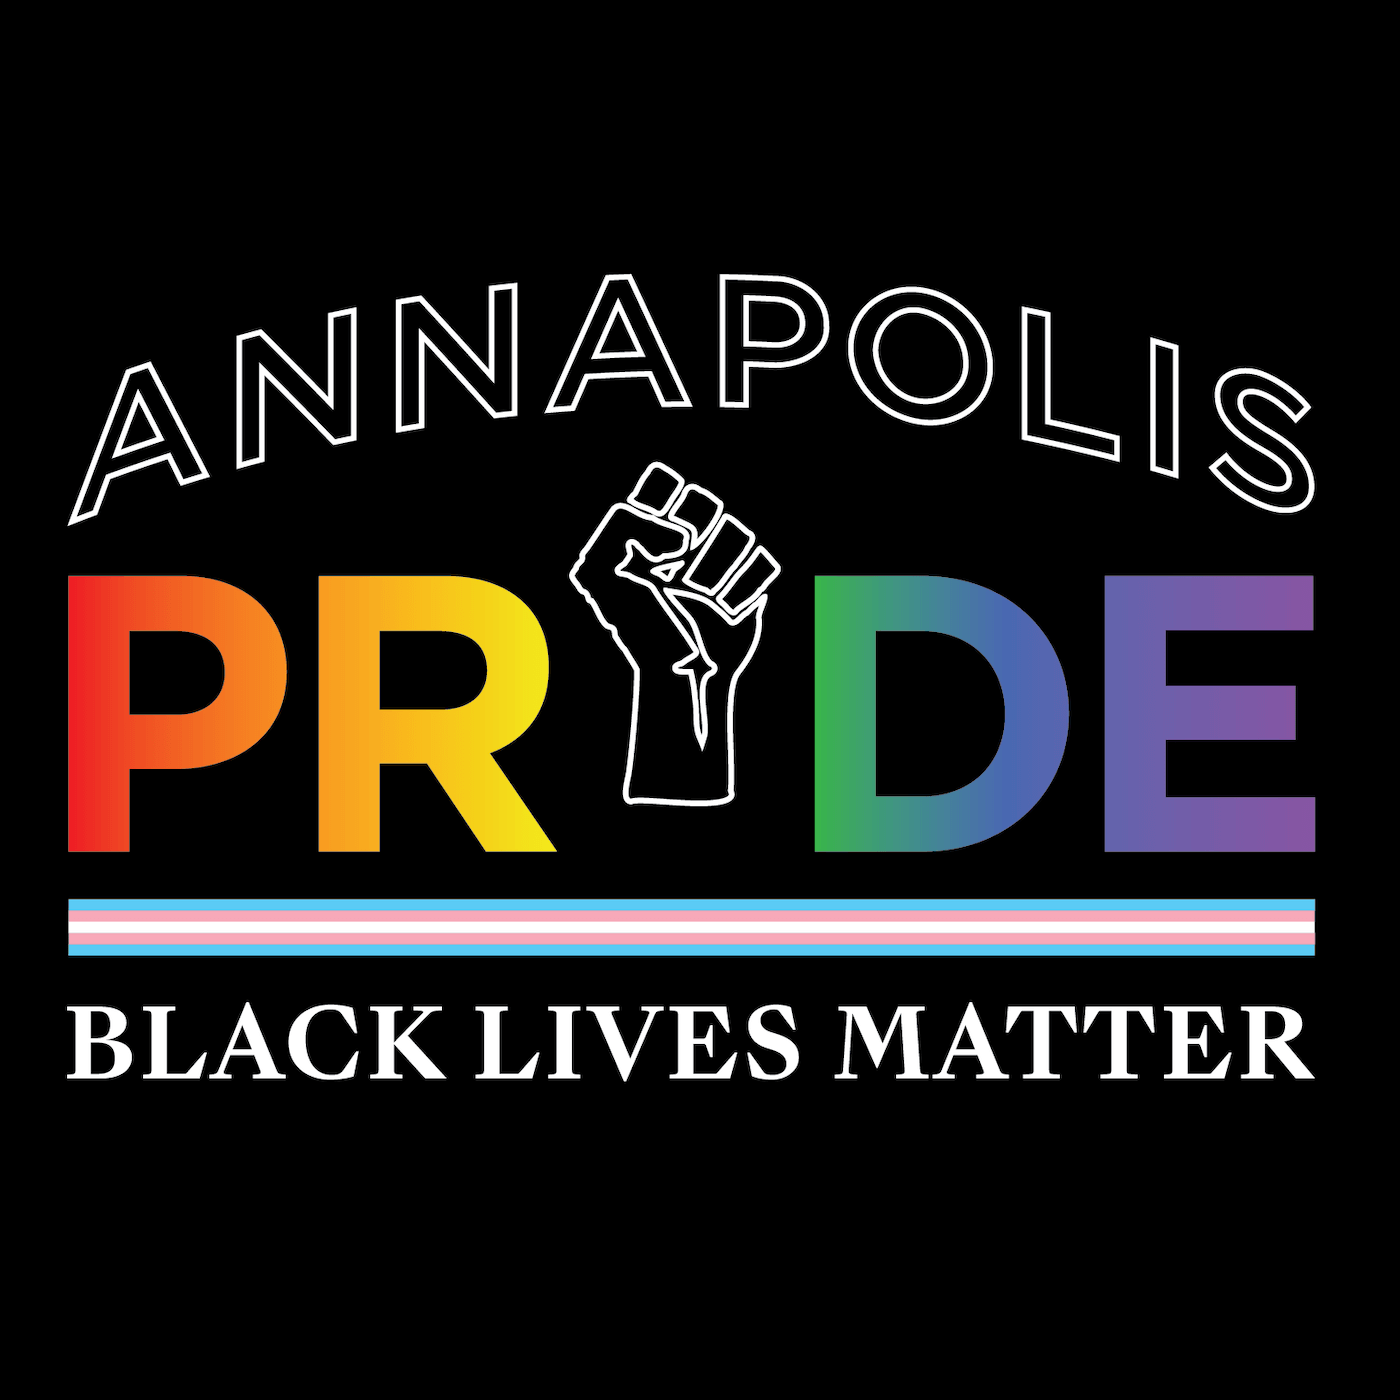 A close-up view of the t-shirt graphic from the previous image. It features a similar appearance to the other branded elements, but without the same playfulness. The 'I' in Pride is replaced with the black power fist, and the words 'Black Lives Matter' are below the logo. In between the logo and this text is a dividing stripe made from the trans pride flag.